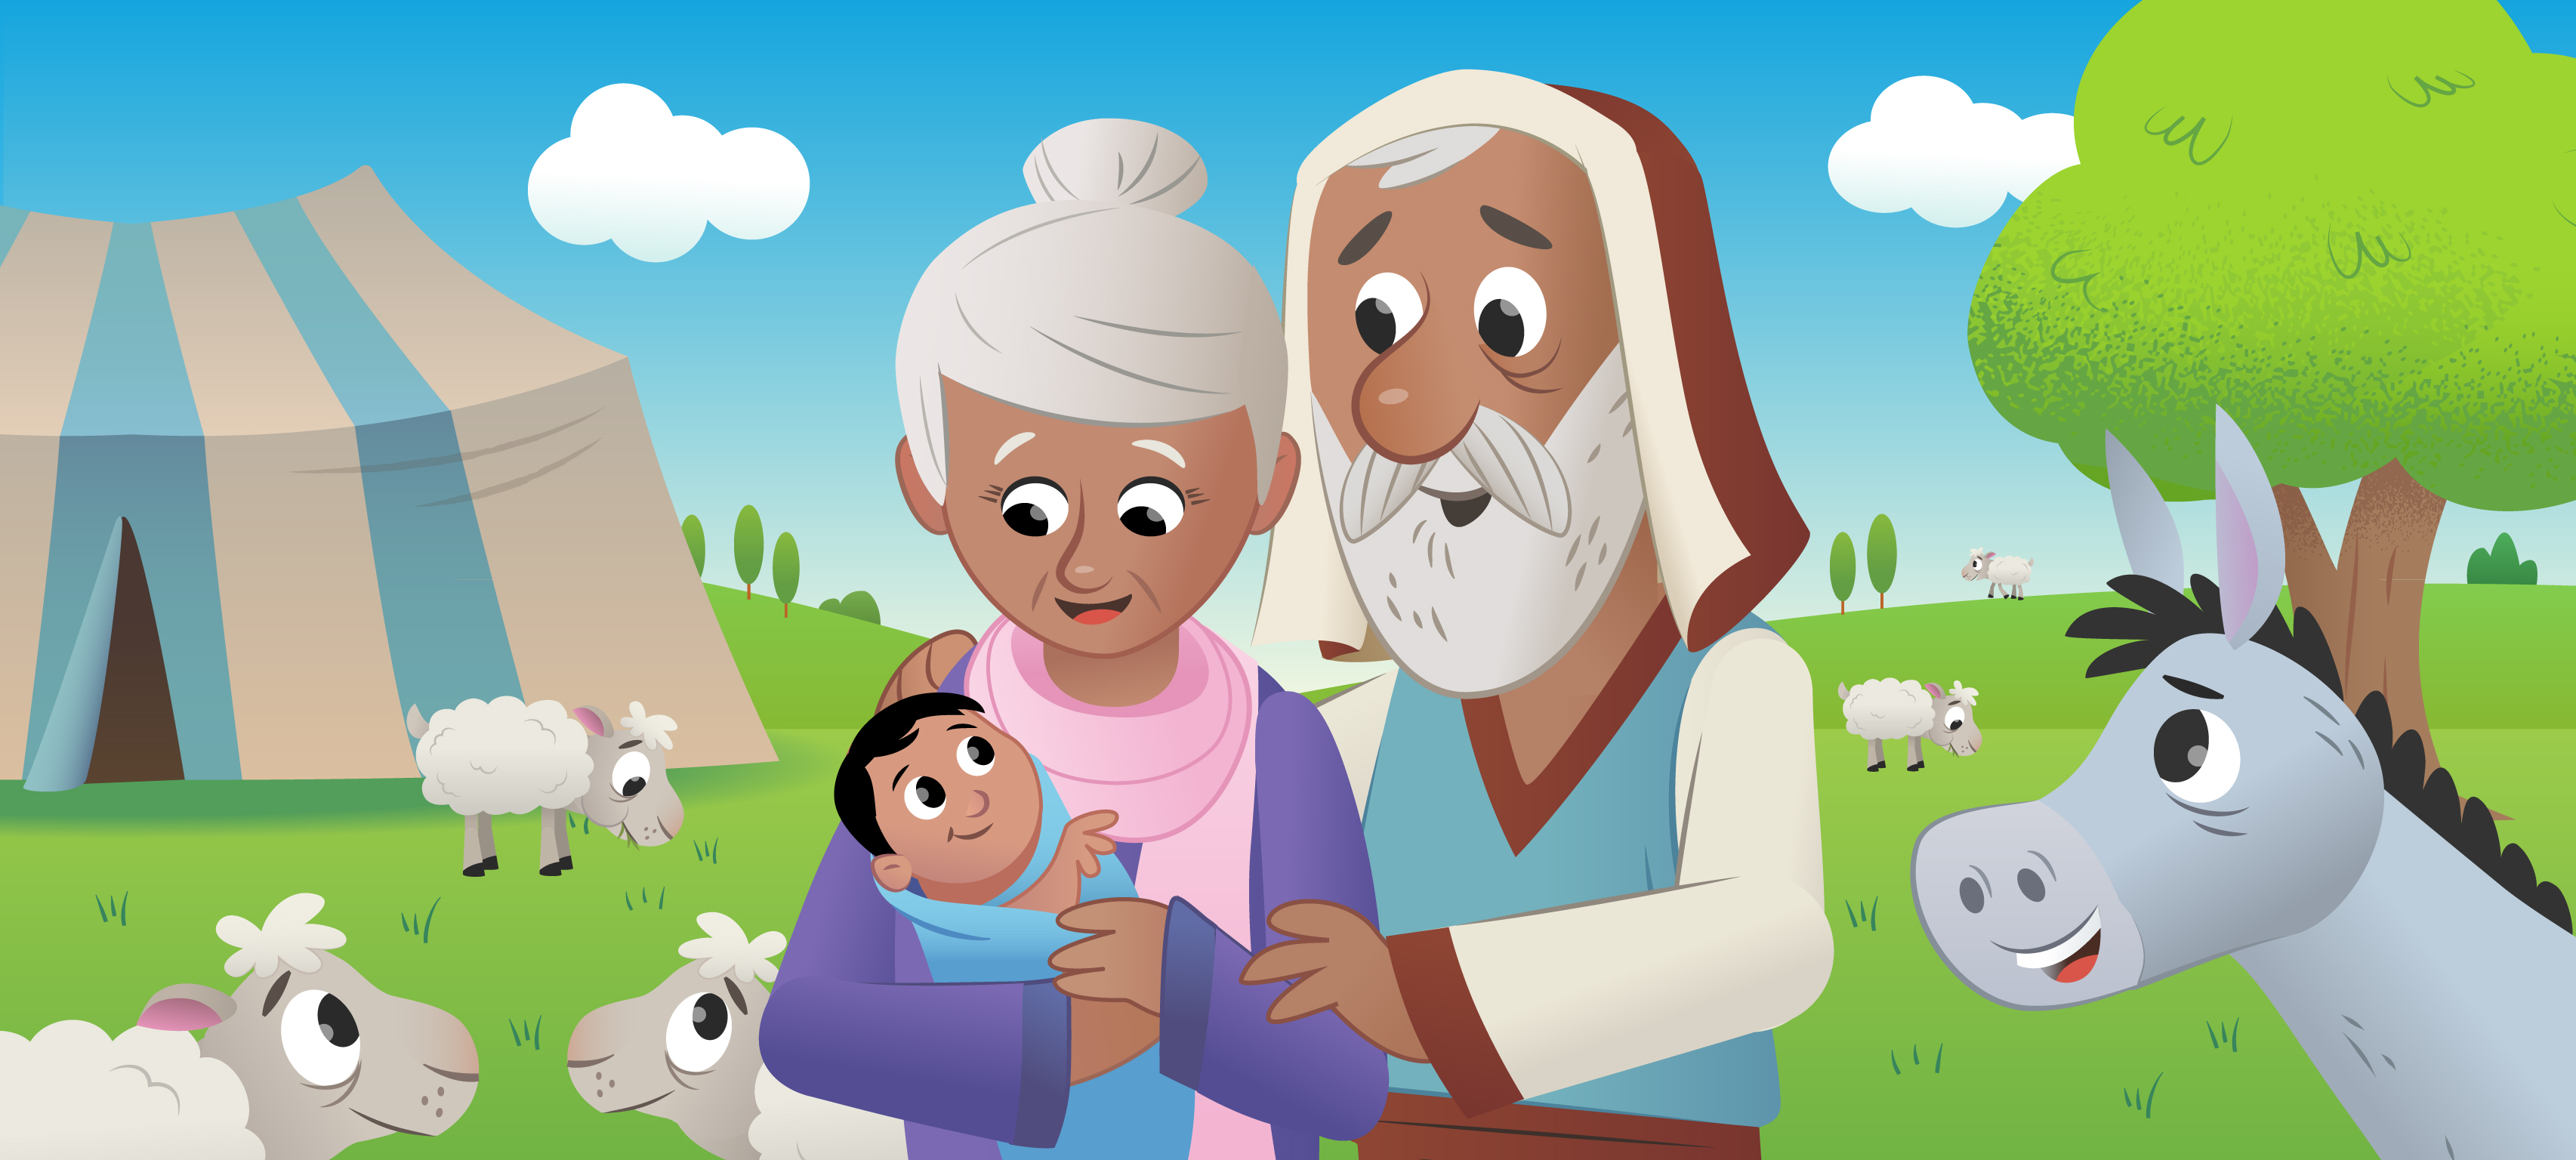 Two New Stories and a New Collectible Set for Kids - YouVersion